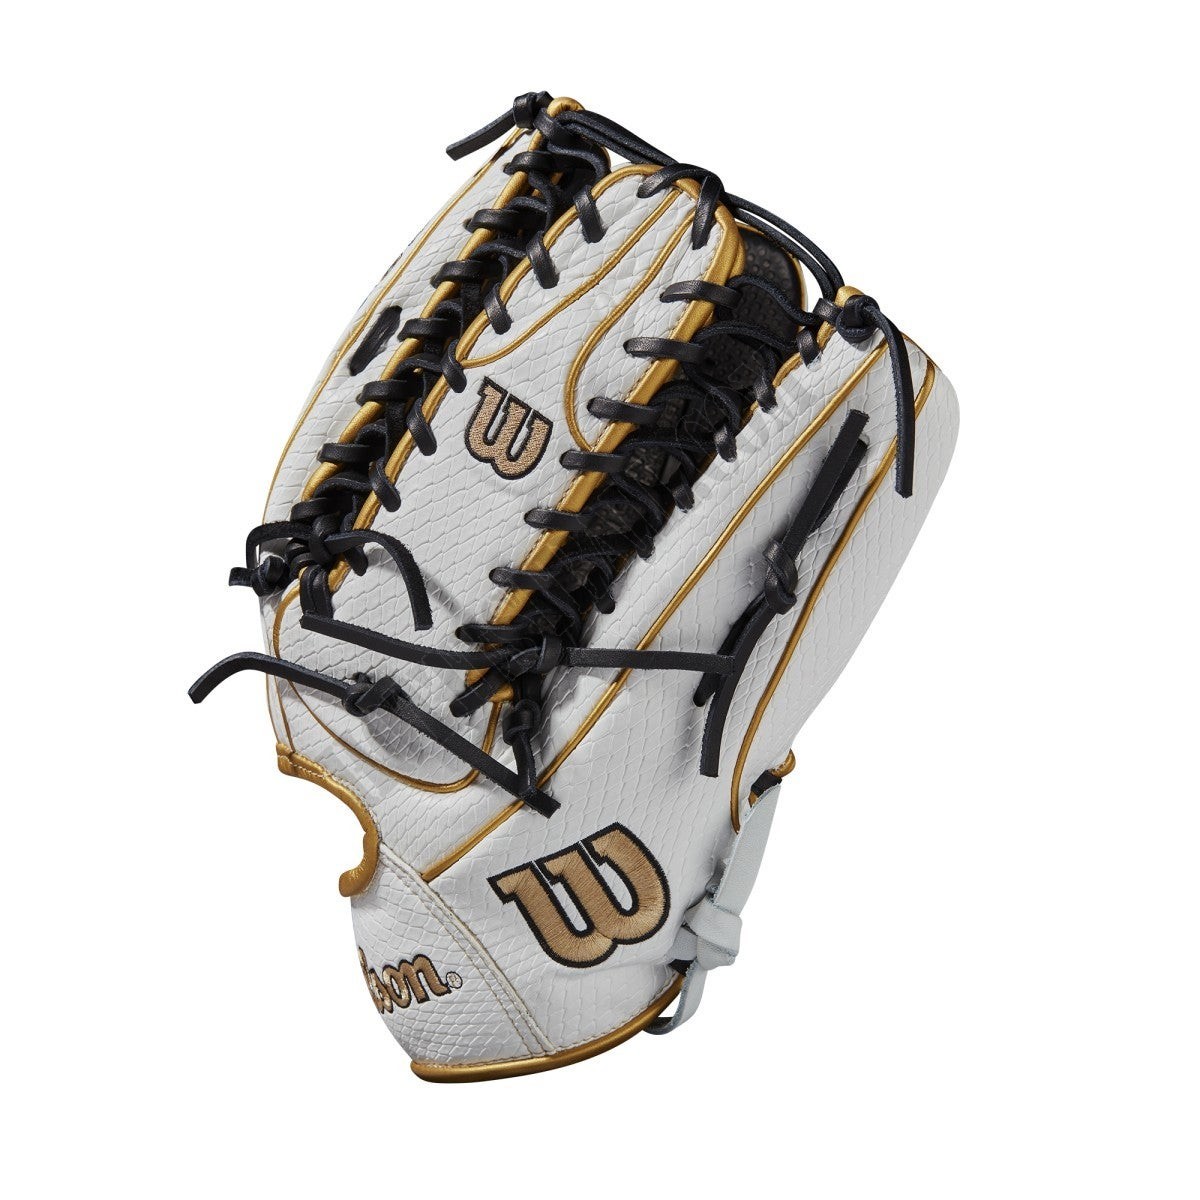 2021 A2000 OT7SS Six String 12.75" Outfield Baseball Glove ● Wilson Promotions - -3